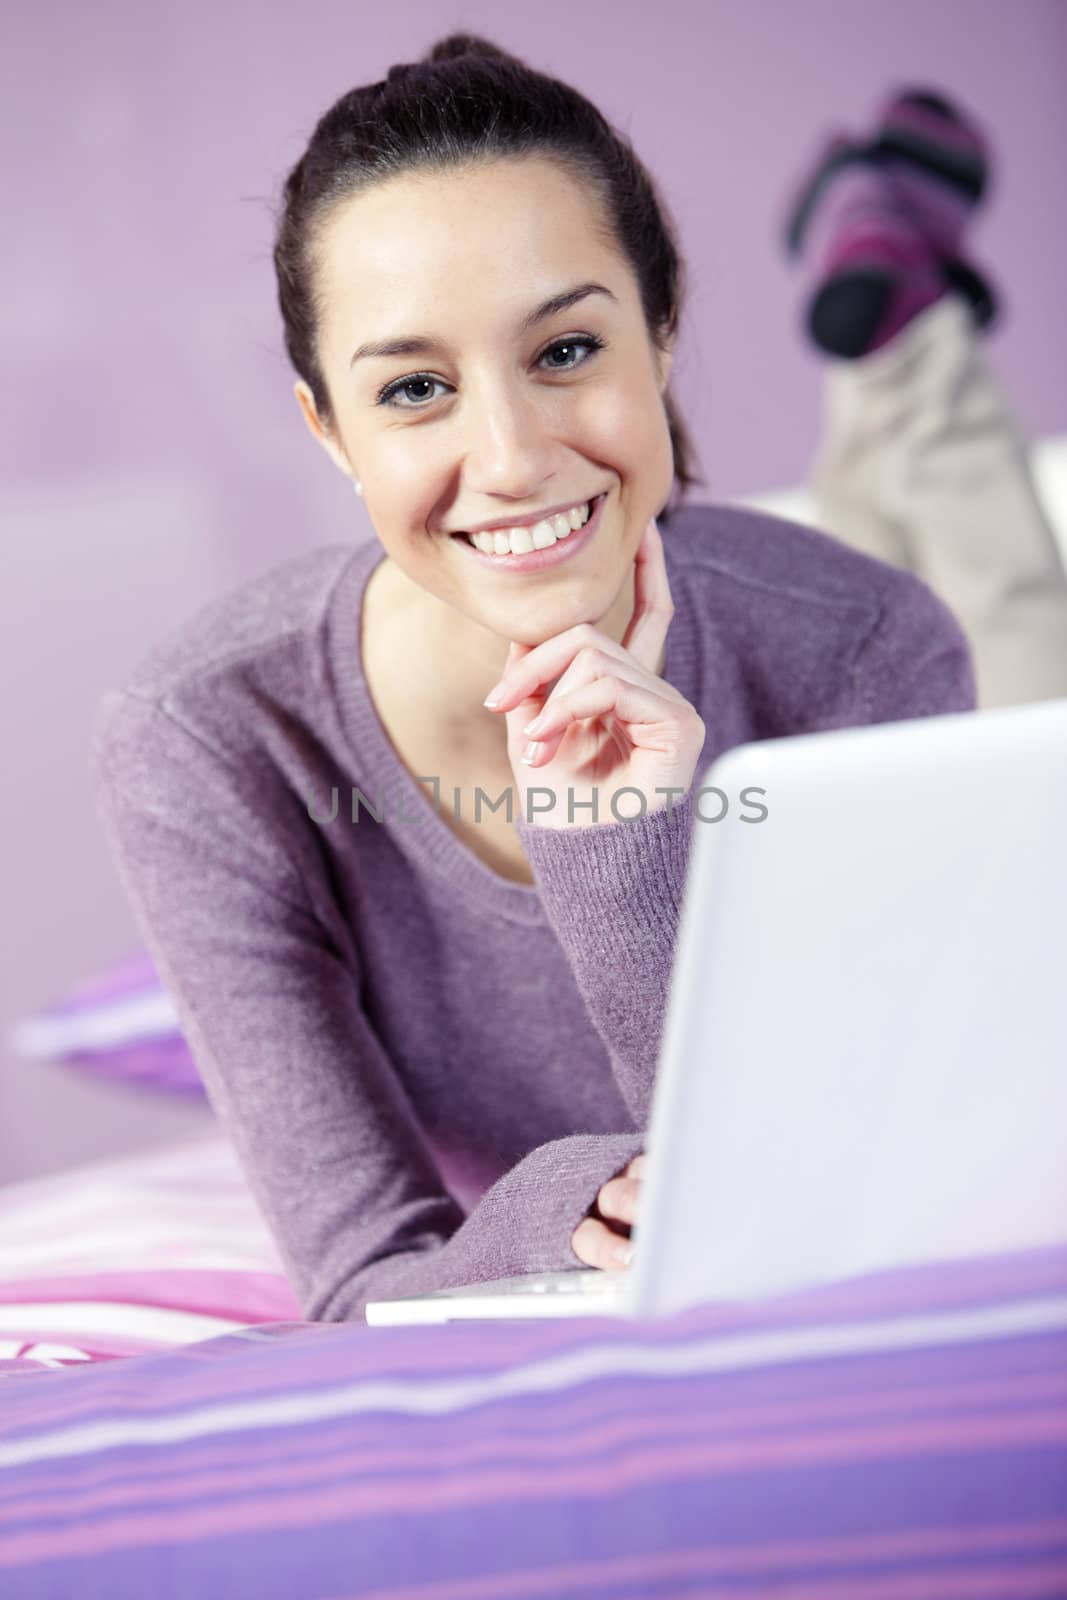 Portrait of a young female relaxing in bed while using laptop by stokkete